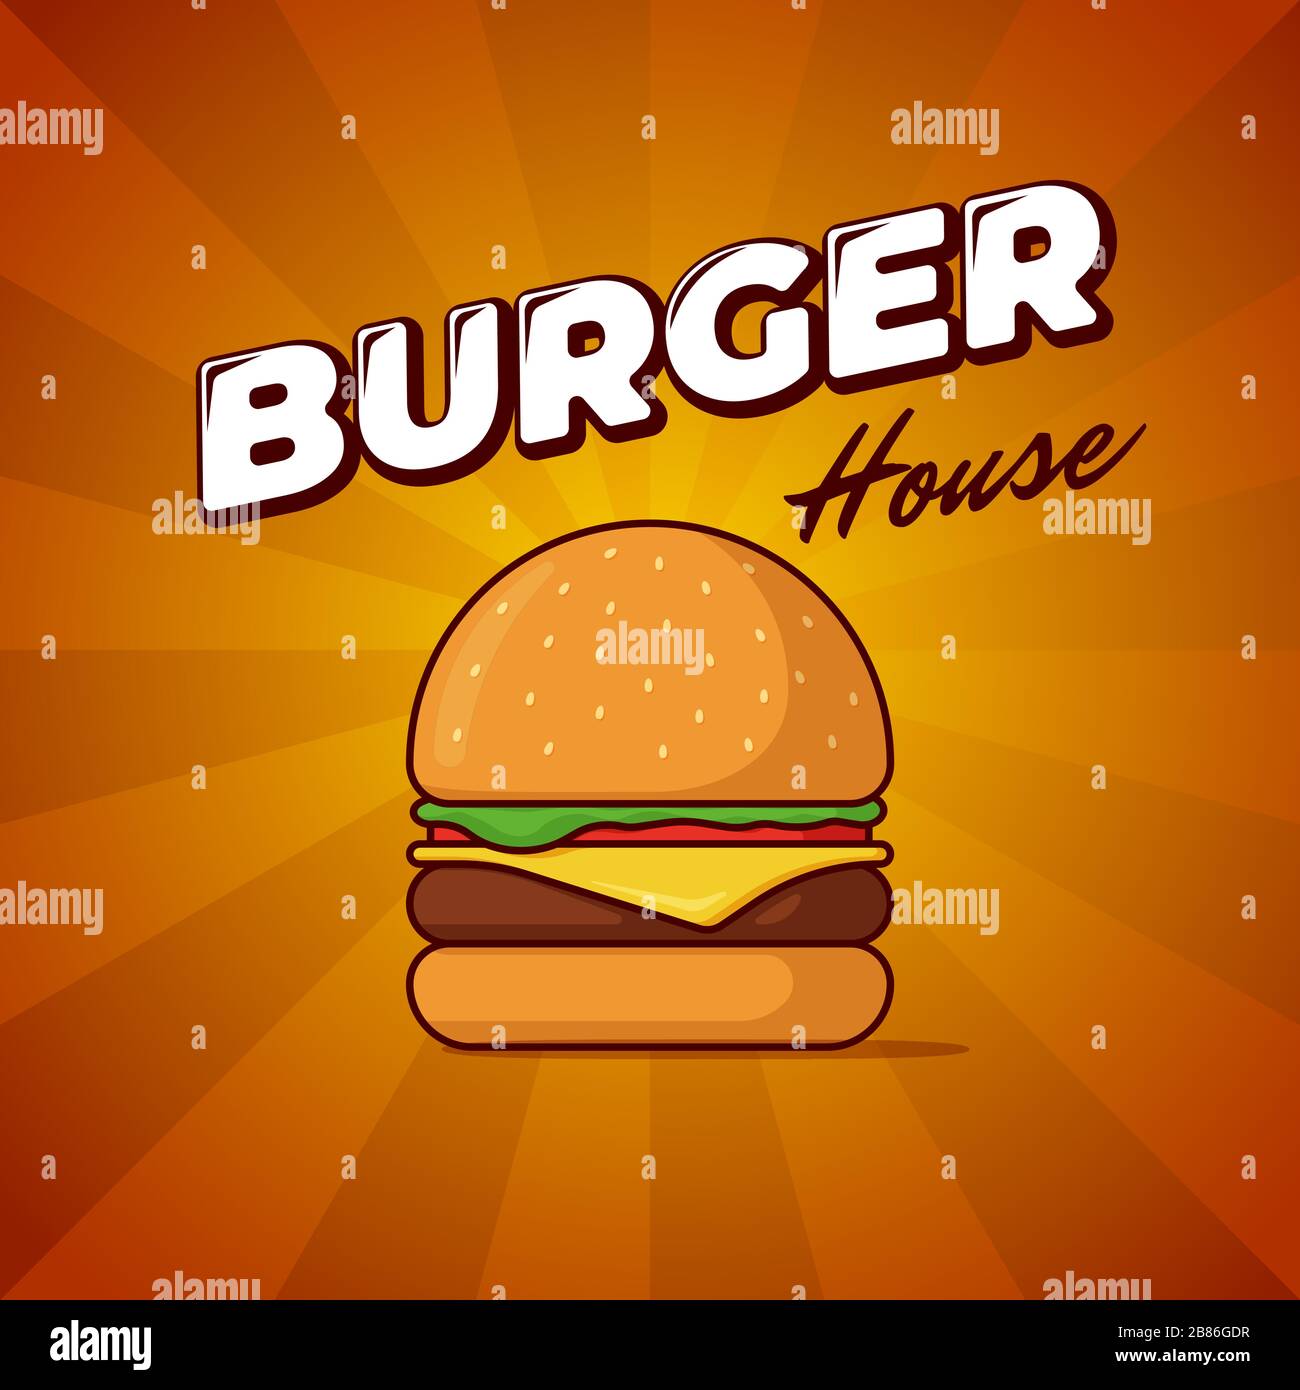 fast food advertisement posters